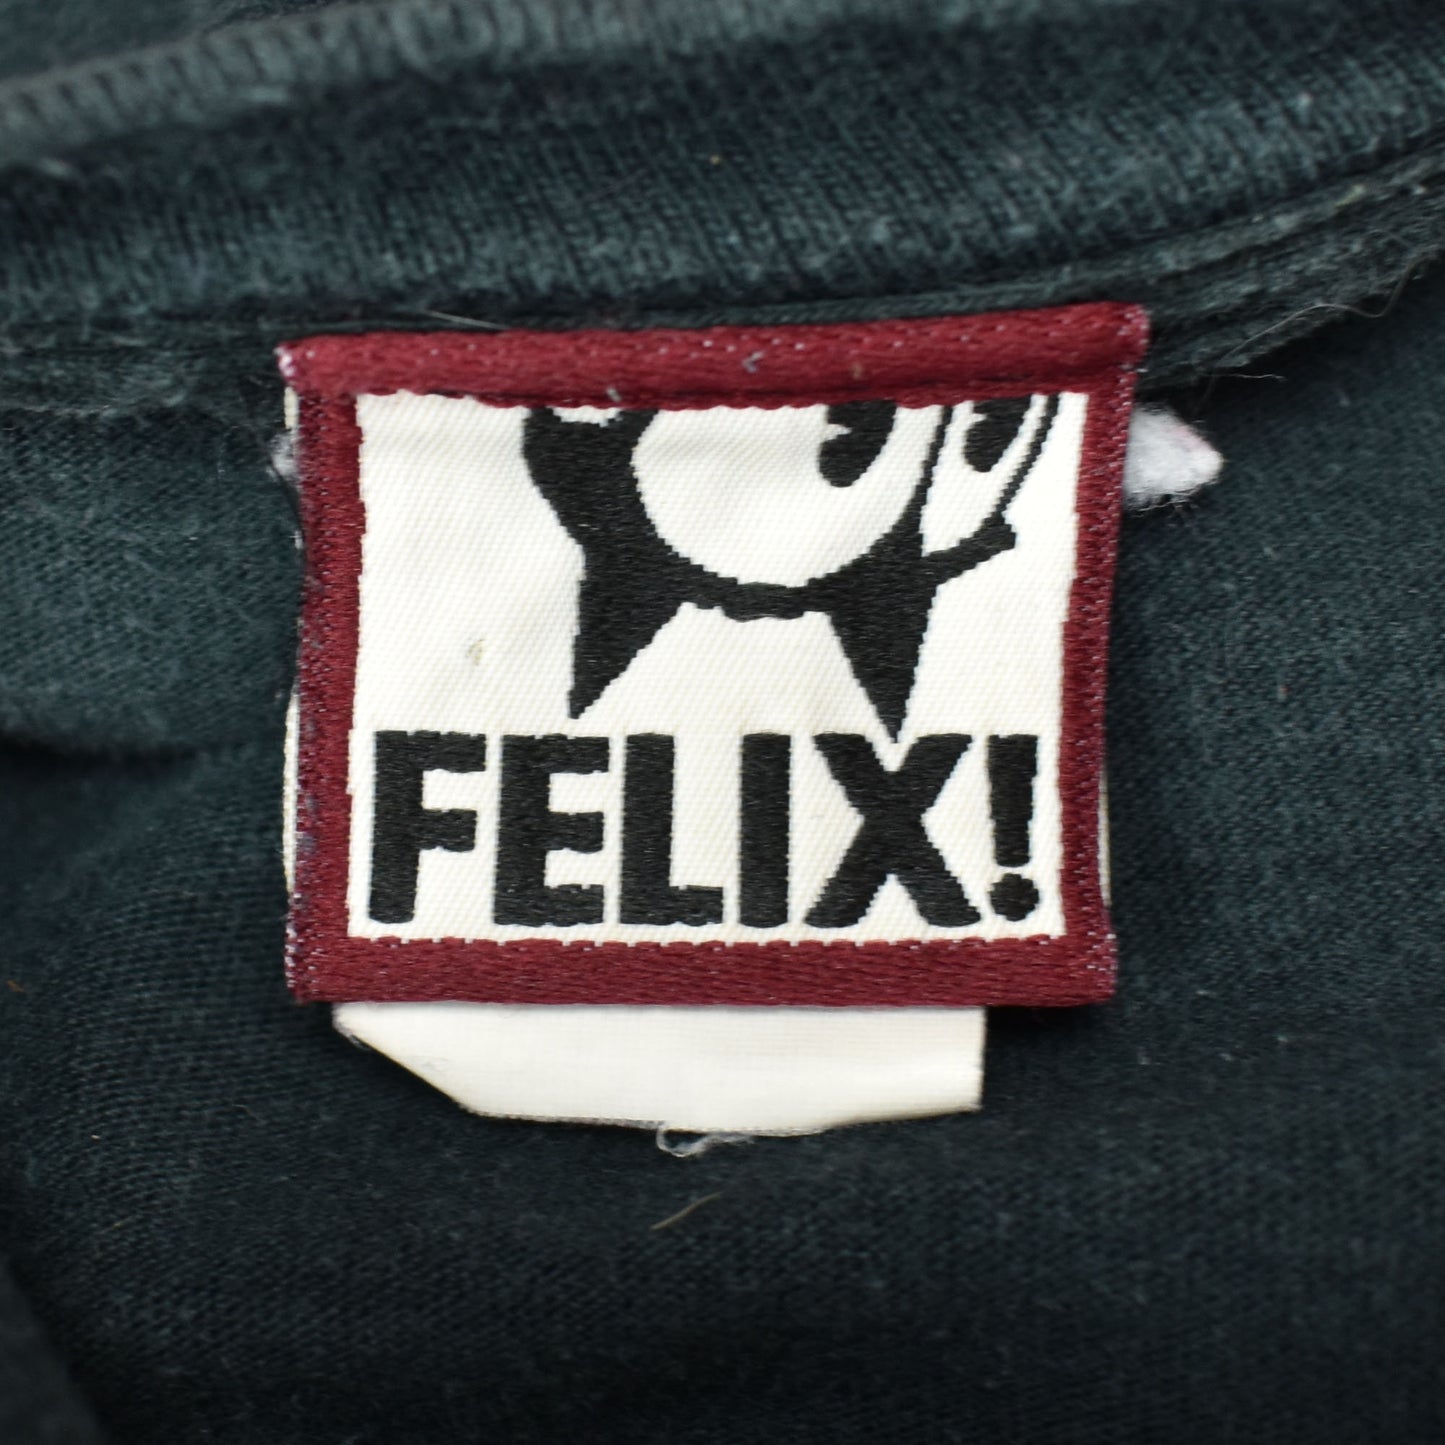 Vintage 90s Felix The Cat T-shirt - One Size Fits All - Single Stitch - Made in USA